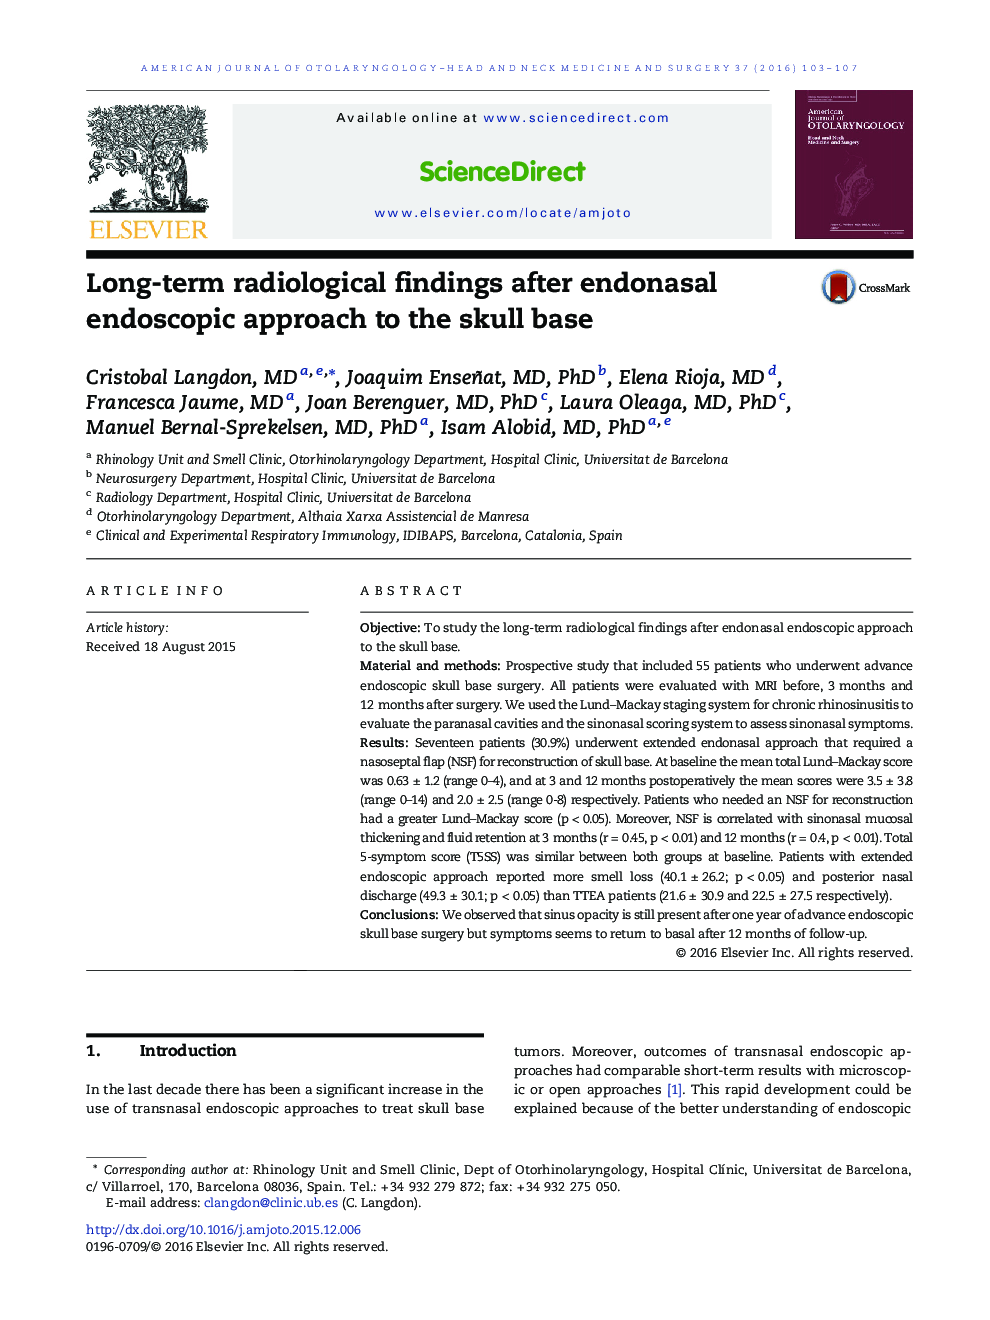 Long-term radiological findings after endonasal endoscopic approach to the skull base